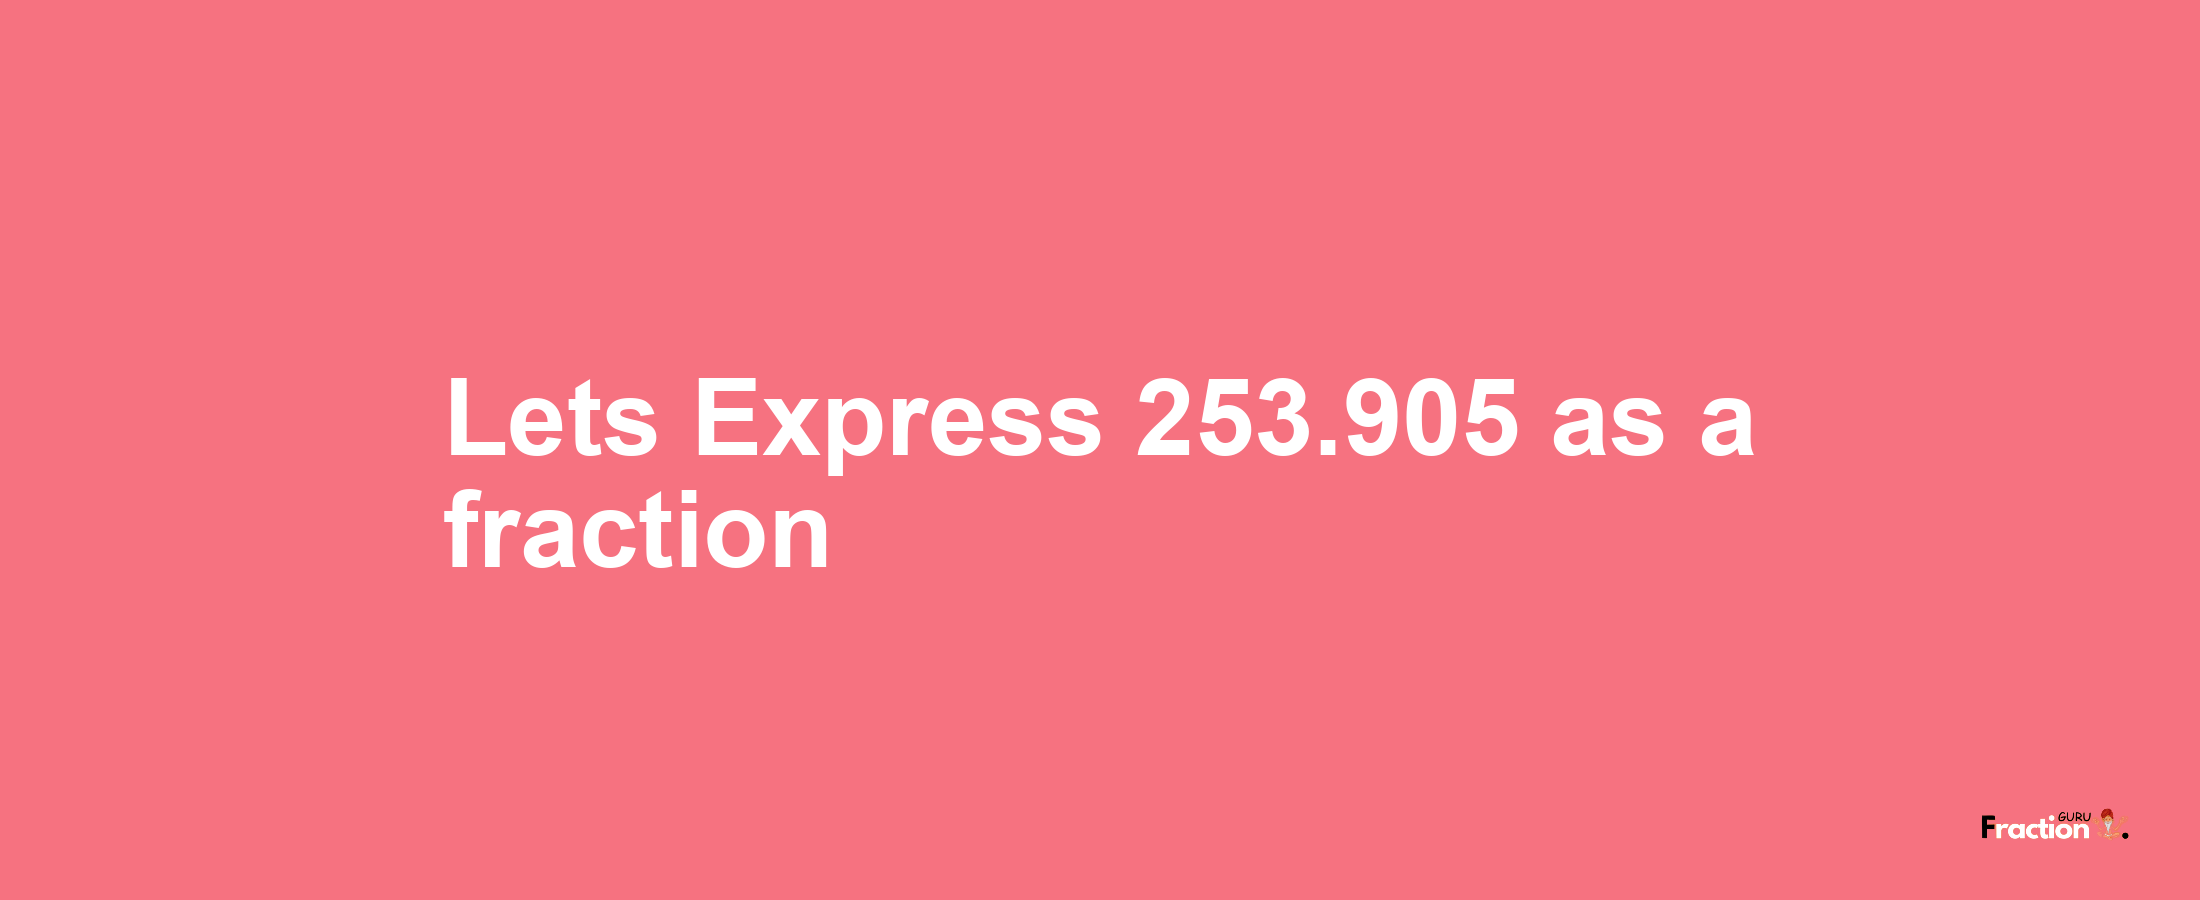 Lets Express 253.905 as afraction